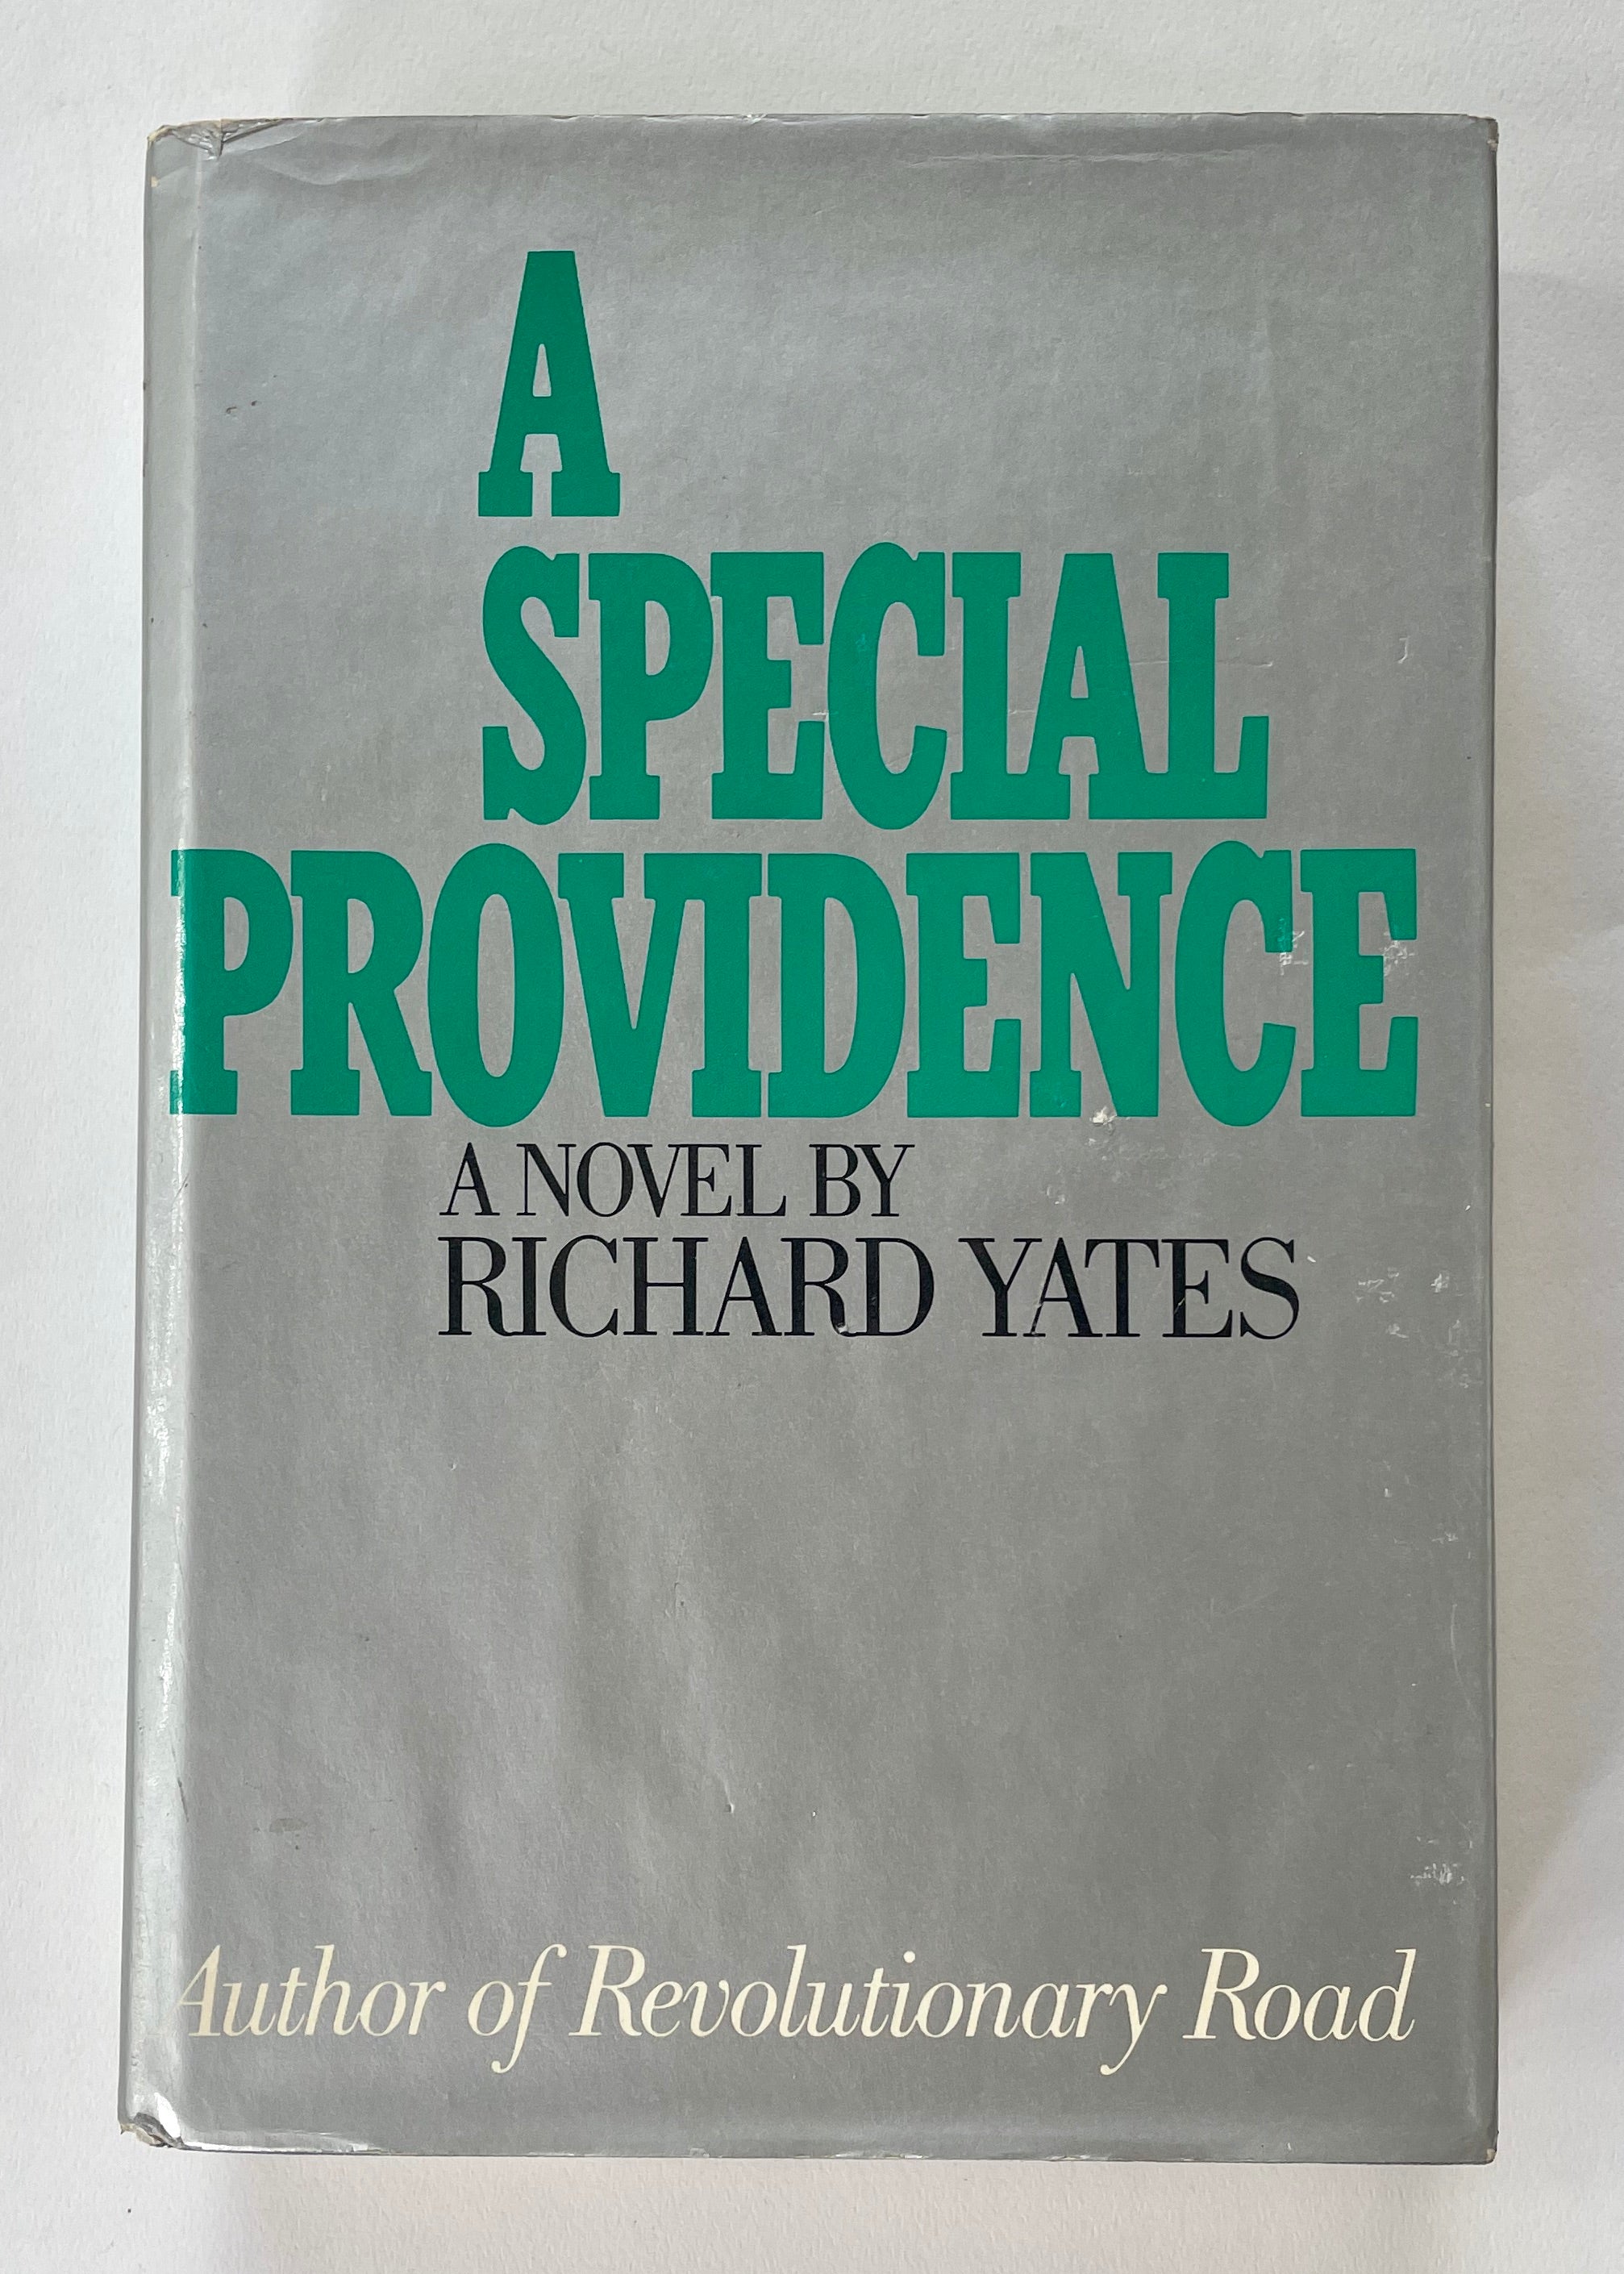 1969 "A Special Providence" by Richard Yates